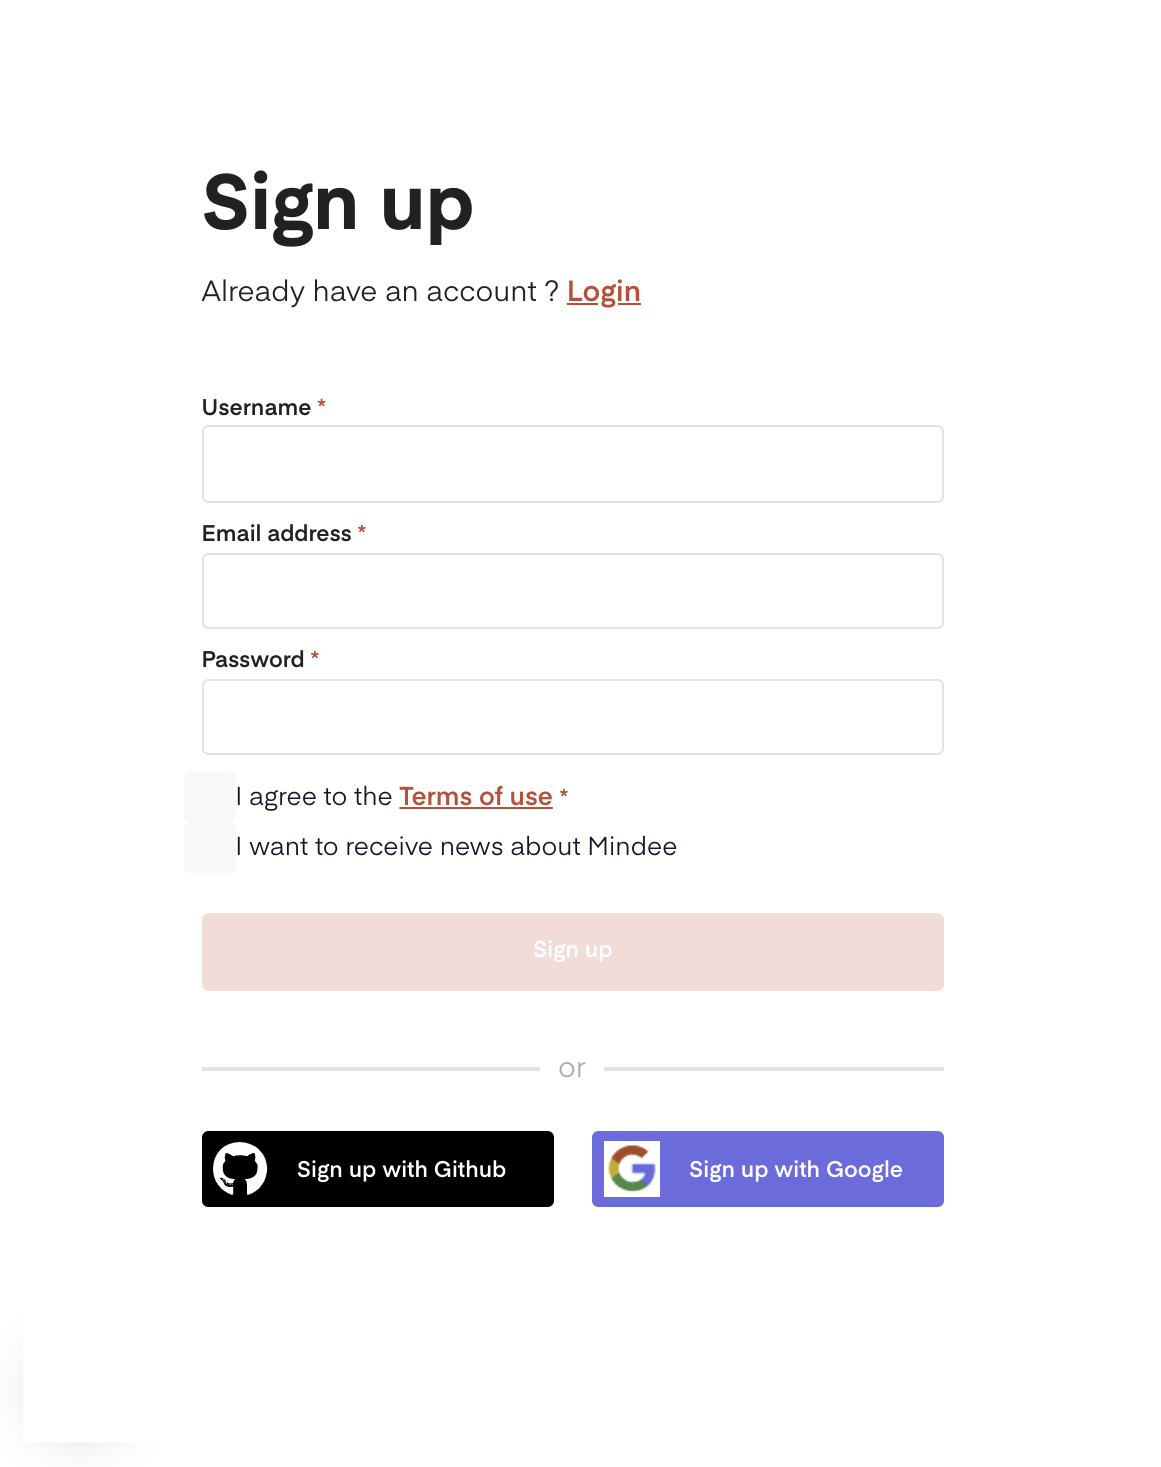 The signup page with fields to fill to create an account